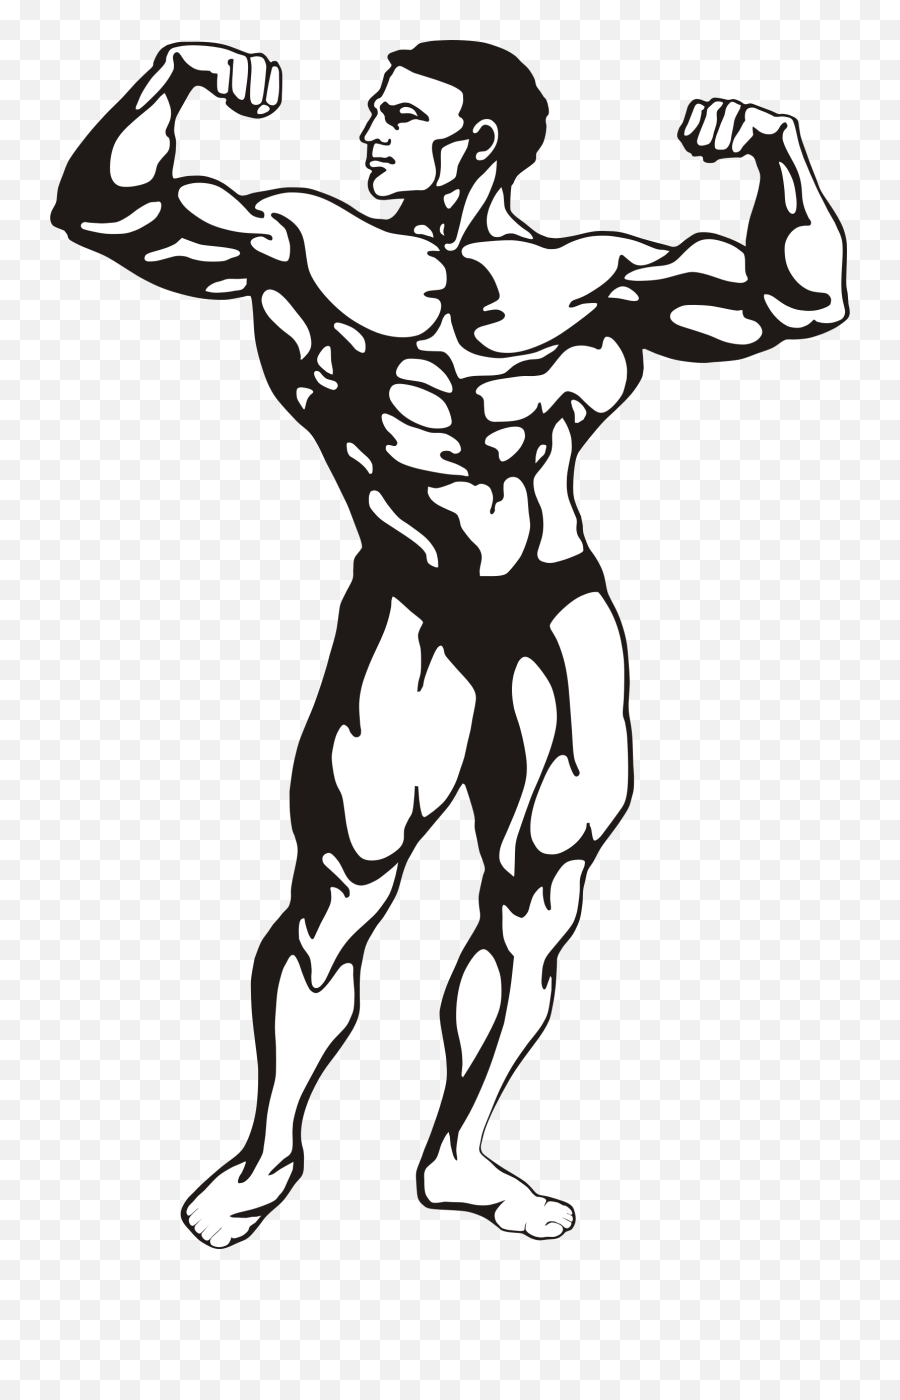 Body Builder Clip Art - Body Builder Clip Art Png,Body Builder Png